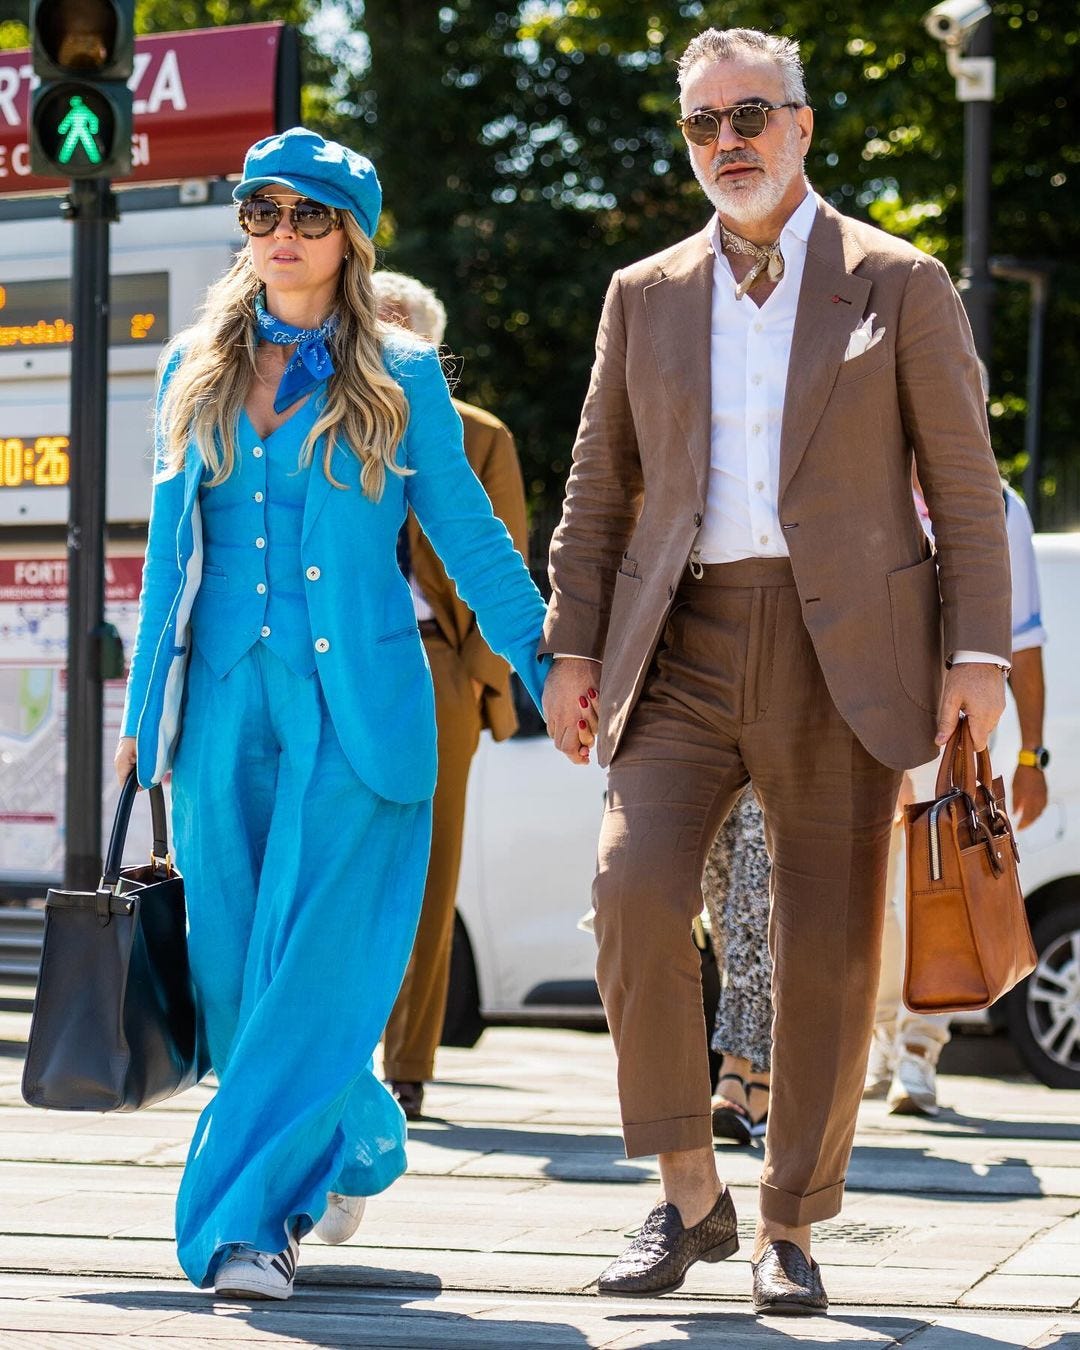 Chic man and woman holding hands, both wearing casual suits